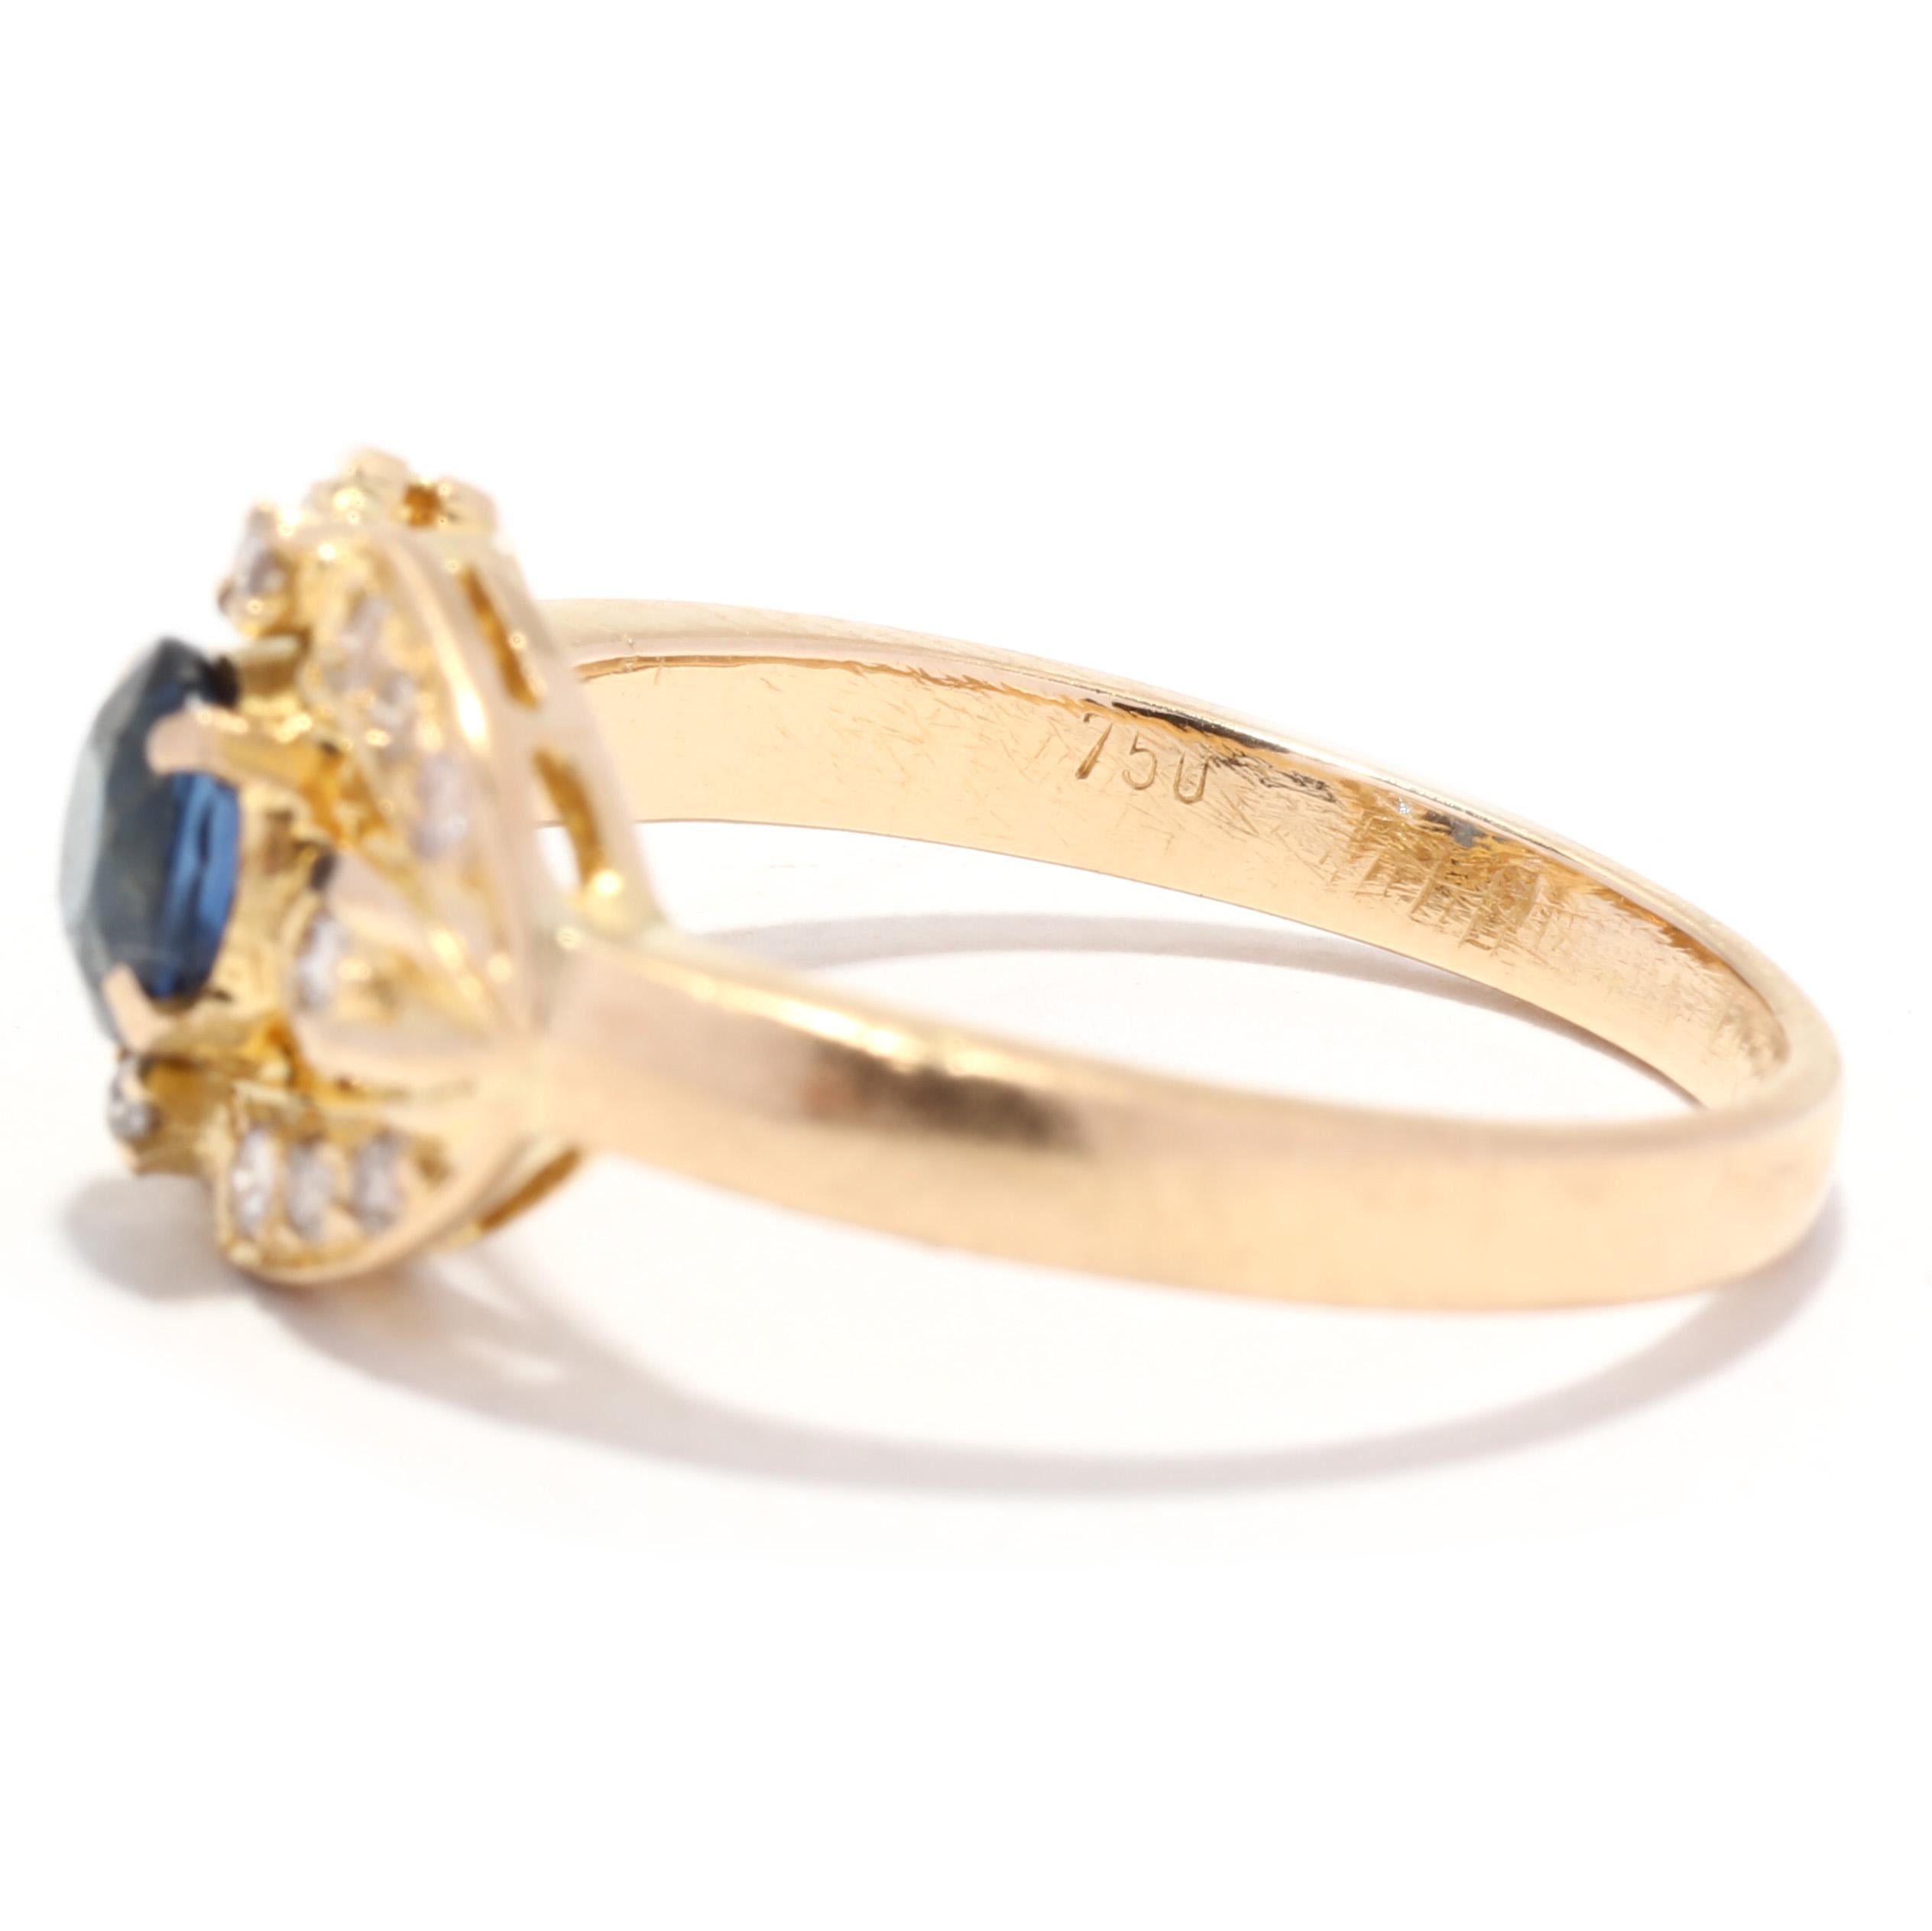 Women's or Men's Sapphire Diamond Cocktail Ring, 18KT Yellow Gold, Ring For Sale